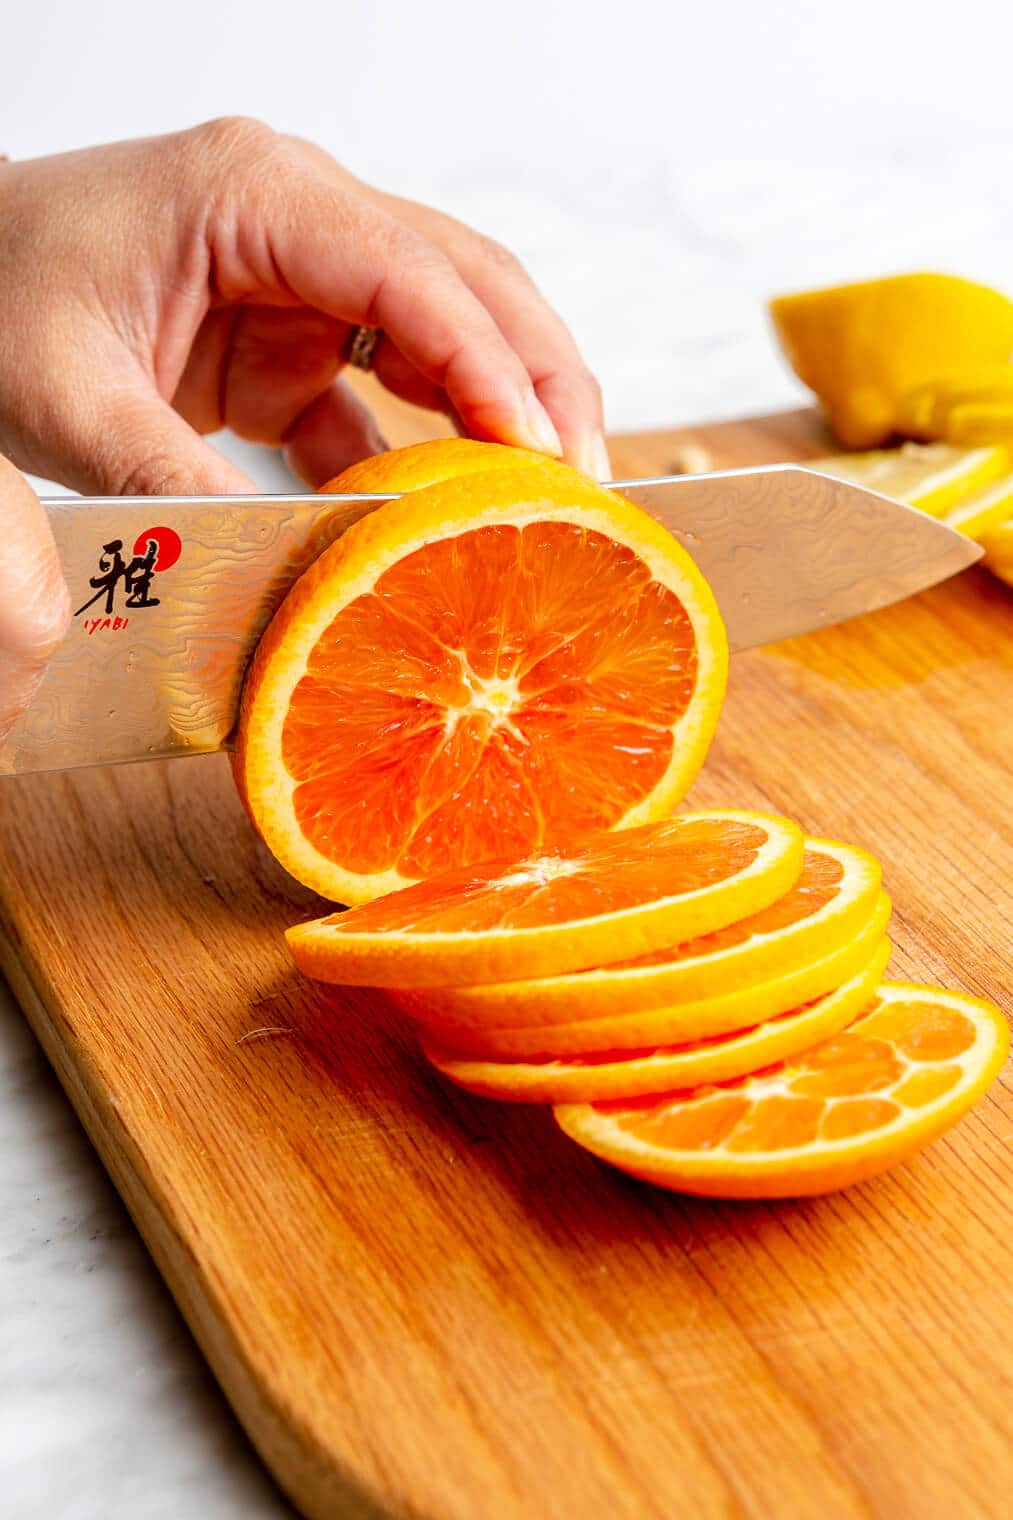 Hand holding an orange and slicing it with a chef's knife on a wooden cutting board.